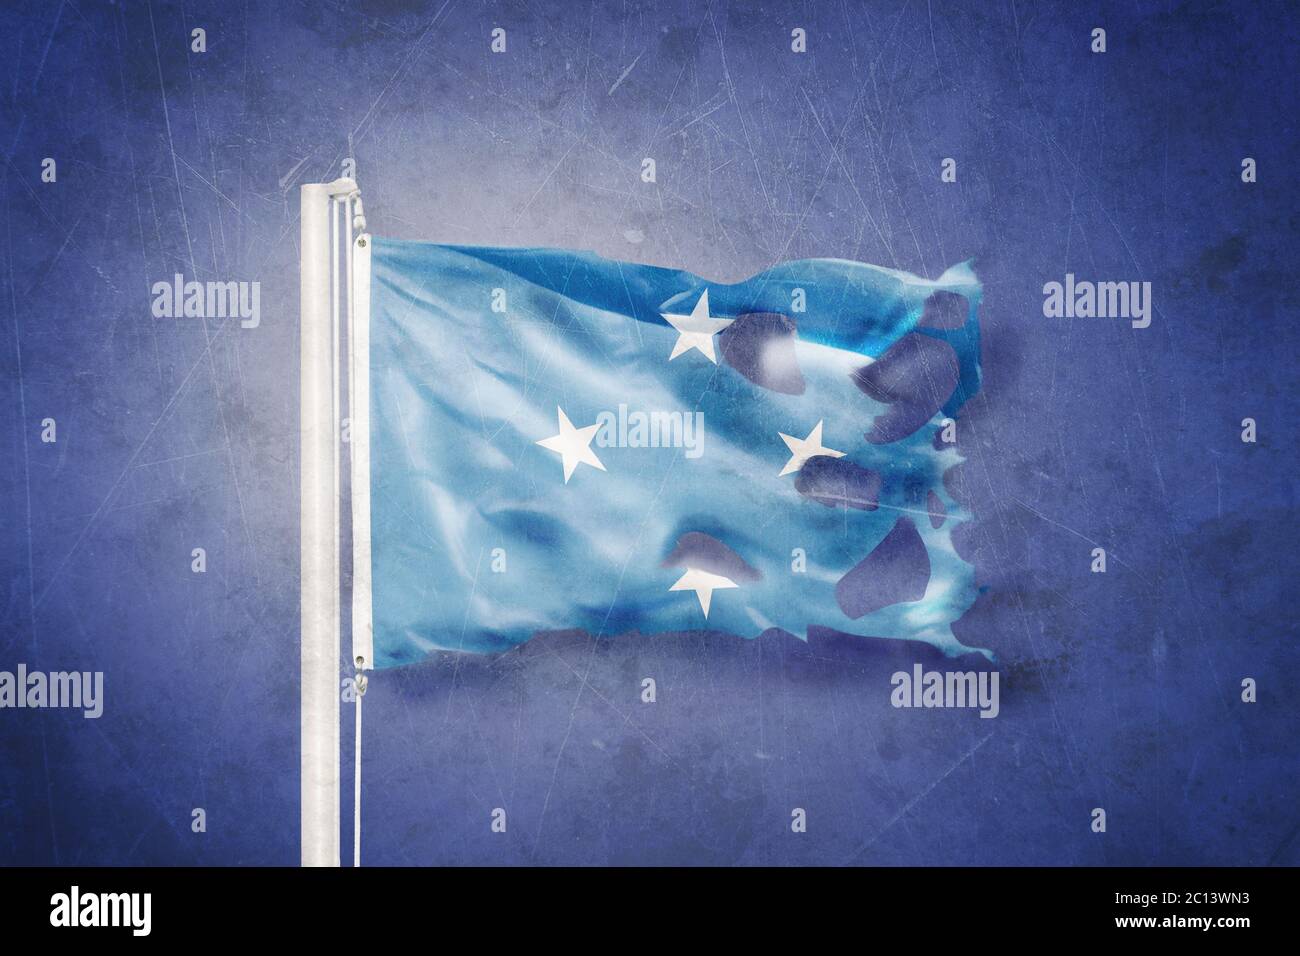 Torn flag Federated States of Micronesia flying against grunge background Stock Photo